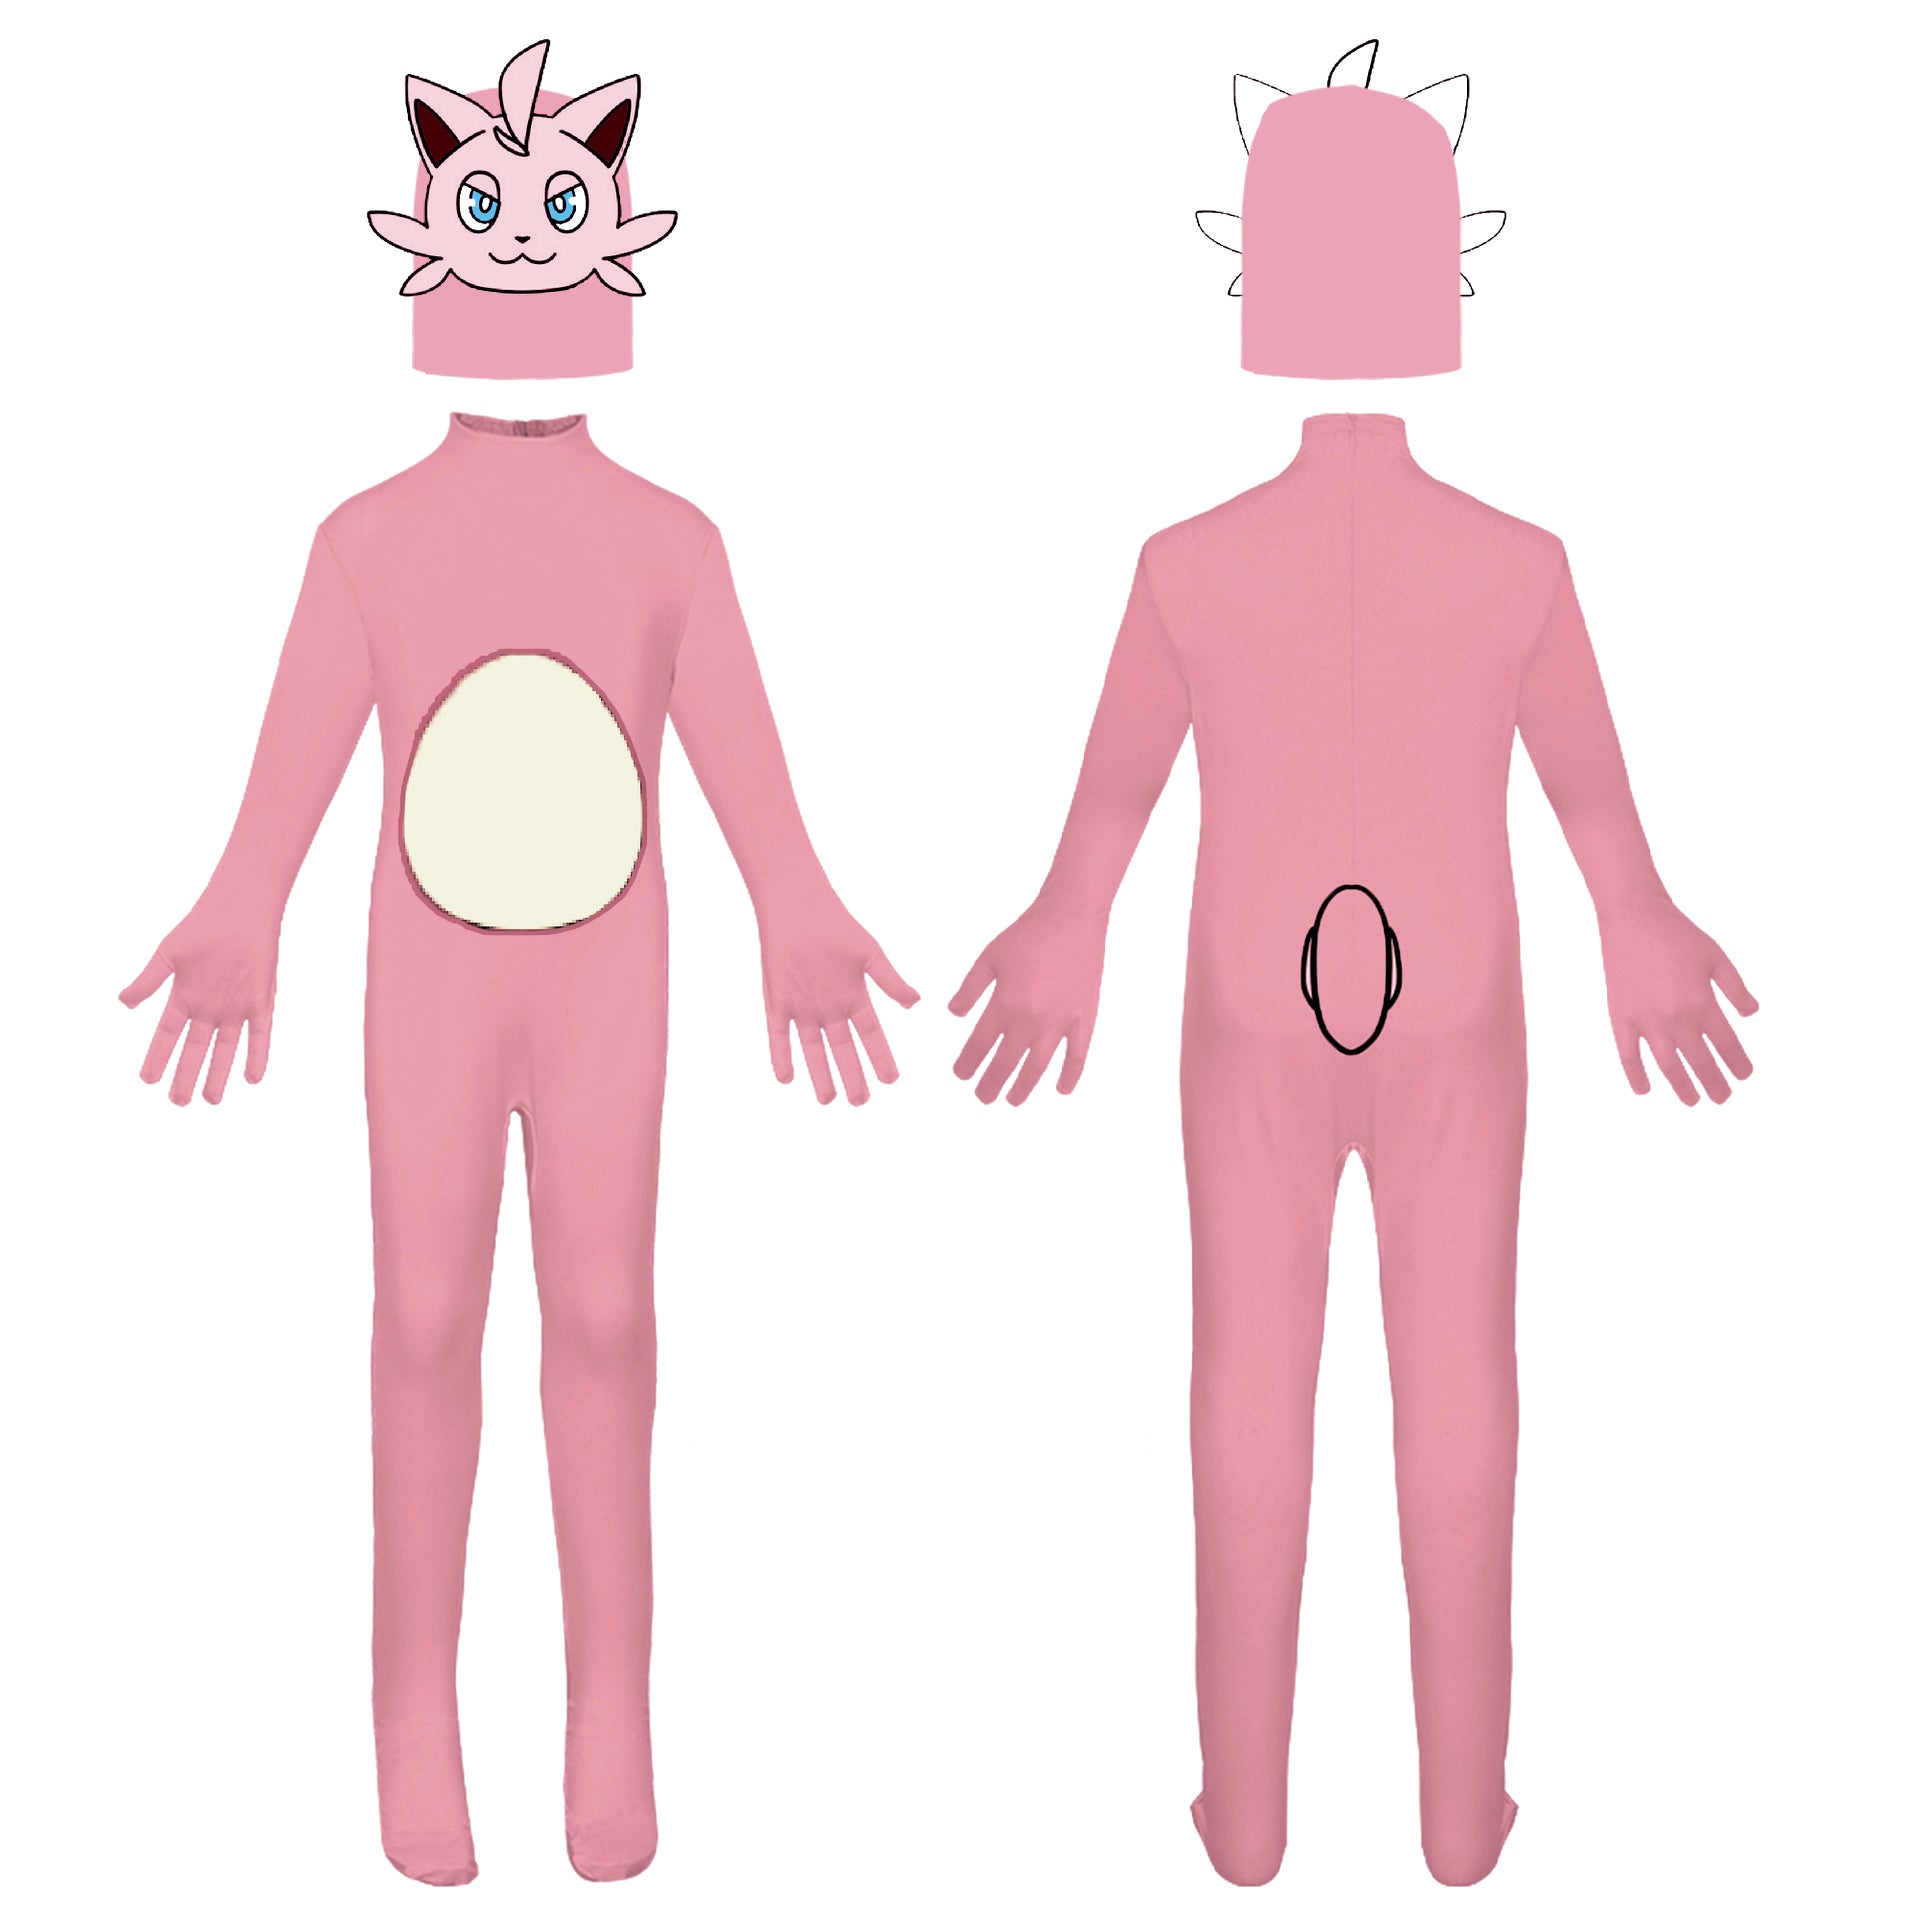 Kids Palworld Costume Cativa Cosplay Outfit Pink Jumpsuit and Helmet 2pcs Suit